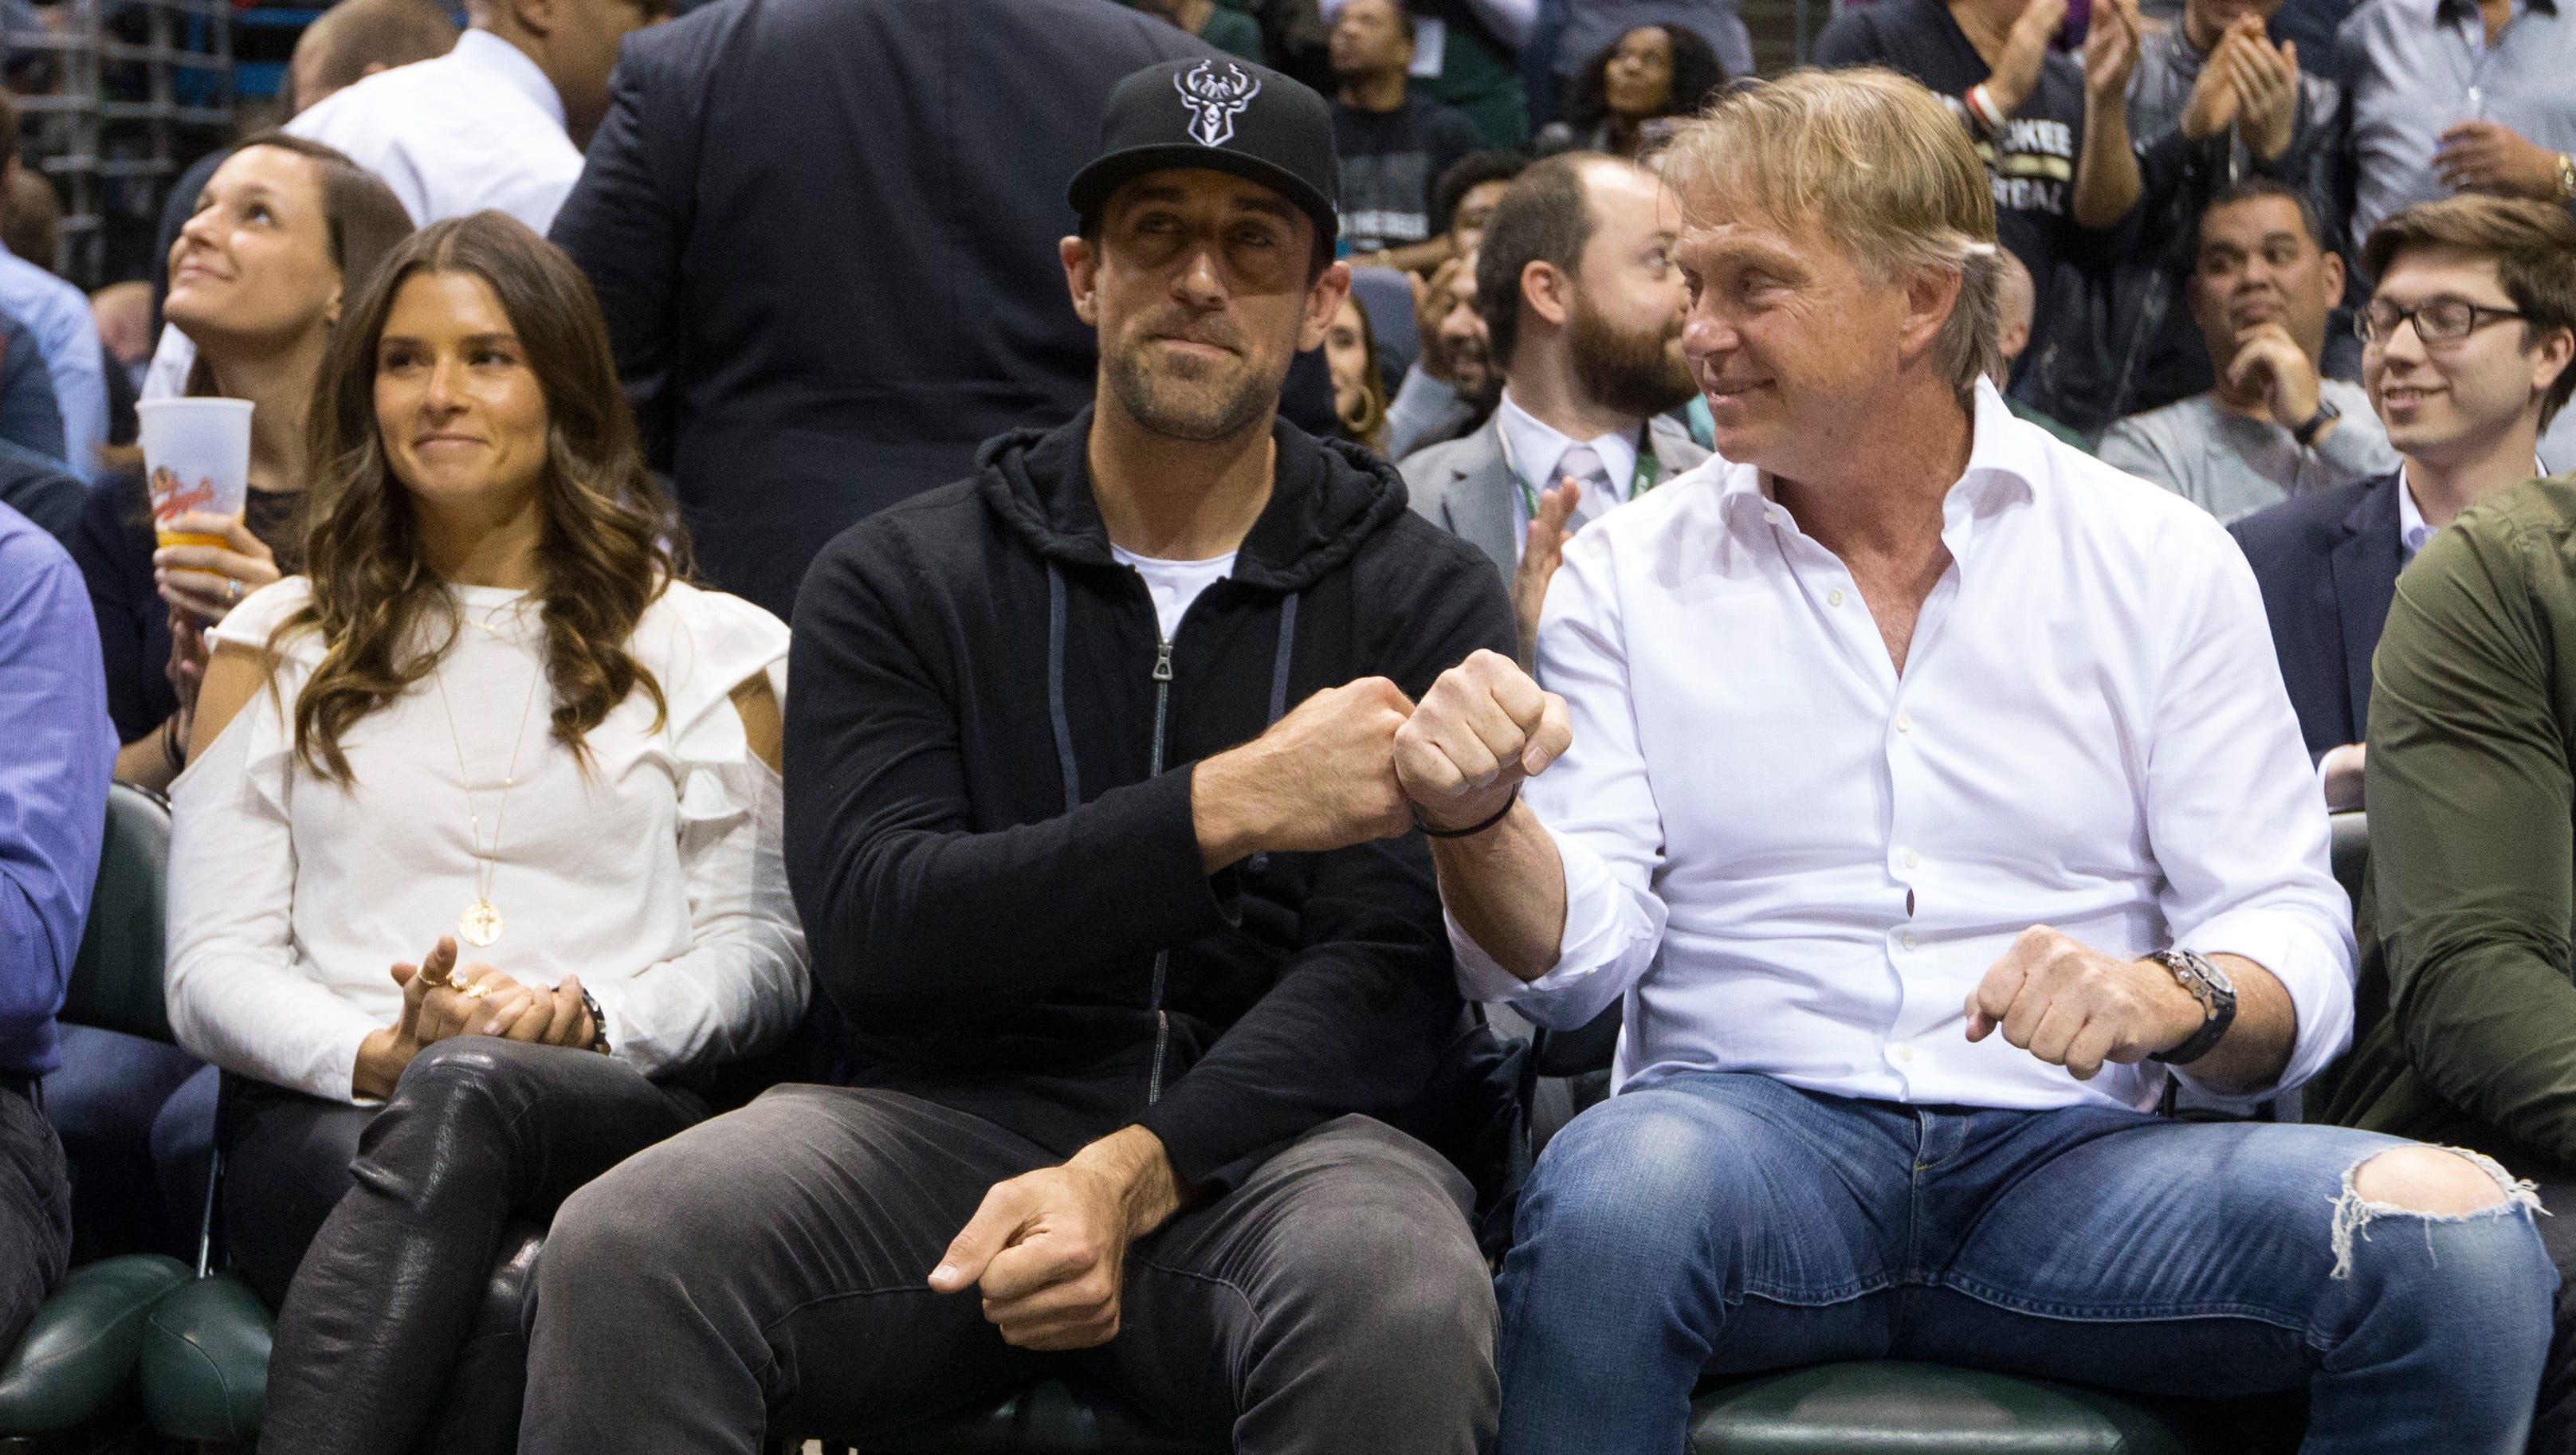 Green Bay Packers quarterback Aaron Rodgers (left) fist bumps Wes Edens, an owner of the Milwaukee Bucks, after it was announced Rodgers had joined the Bucks' ownership team. Next to Rodgers is race car driver Danica Patrick.